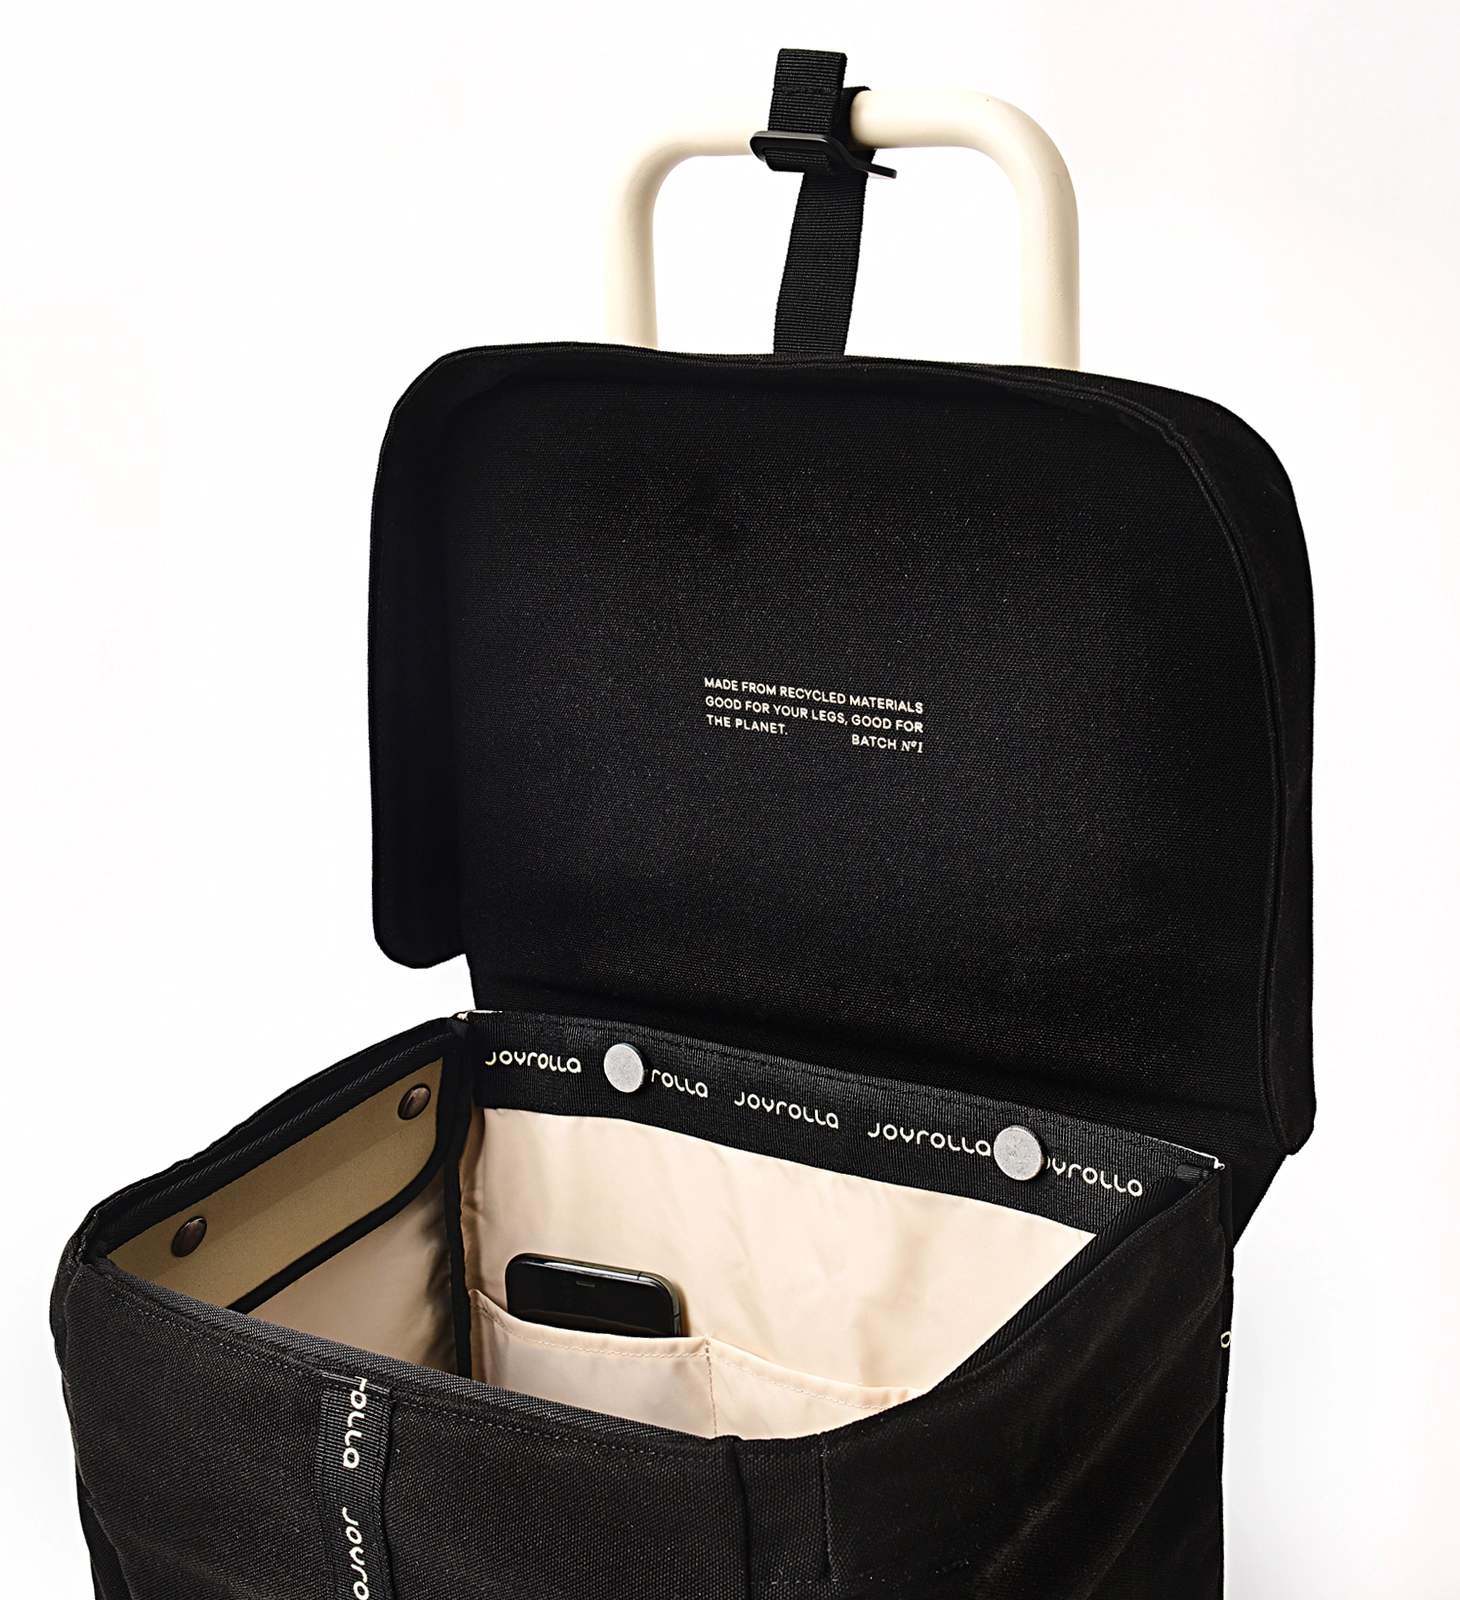 A detailed photo of the Joyrolla Cart with a black bag, showcasing its internal pockets and functional features. The cart's black bag is visible, featuring multiple internal pockets for organizing items. One pocket holds a phone securely. The lid of the cart is being held up by a handy strap, allowing easy access to the contents inside. This cart offers convenient storage solutions with its internal pockets, ensuring items are kept organized and easily accessible while on the move